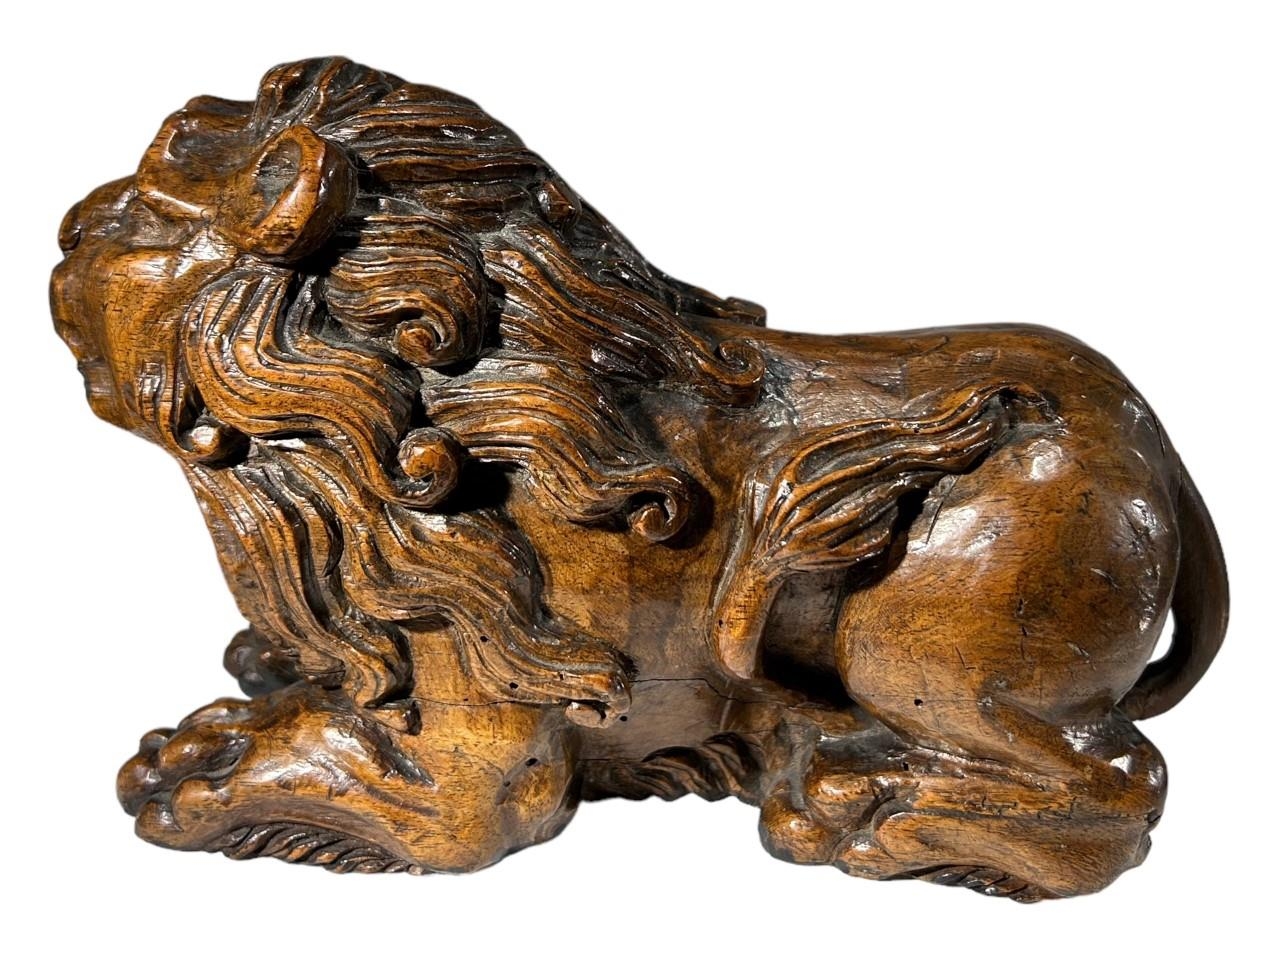 AN ITALIAN 18TH/19TH CENTURY (POSSIBLY WALNUT) CARVED WOOD FIGURE OF A LION. (h 12.5cm x w 20cm x - Image 4 of 7